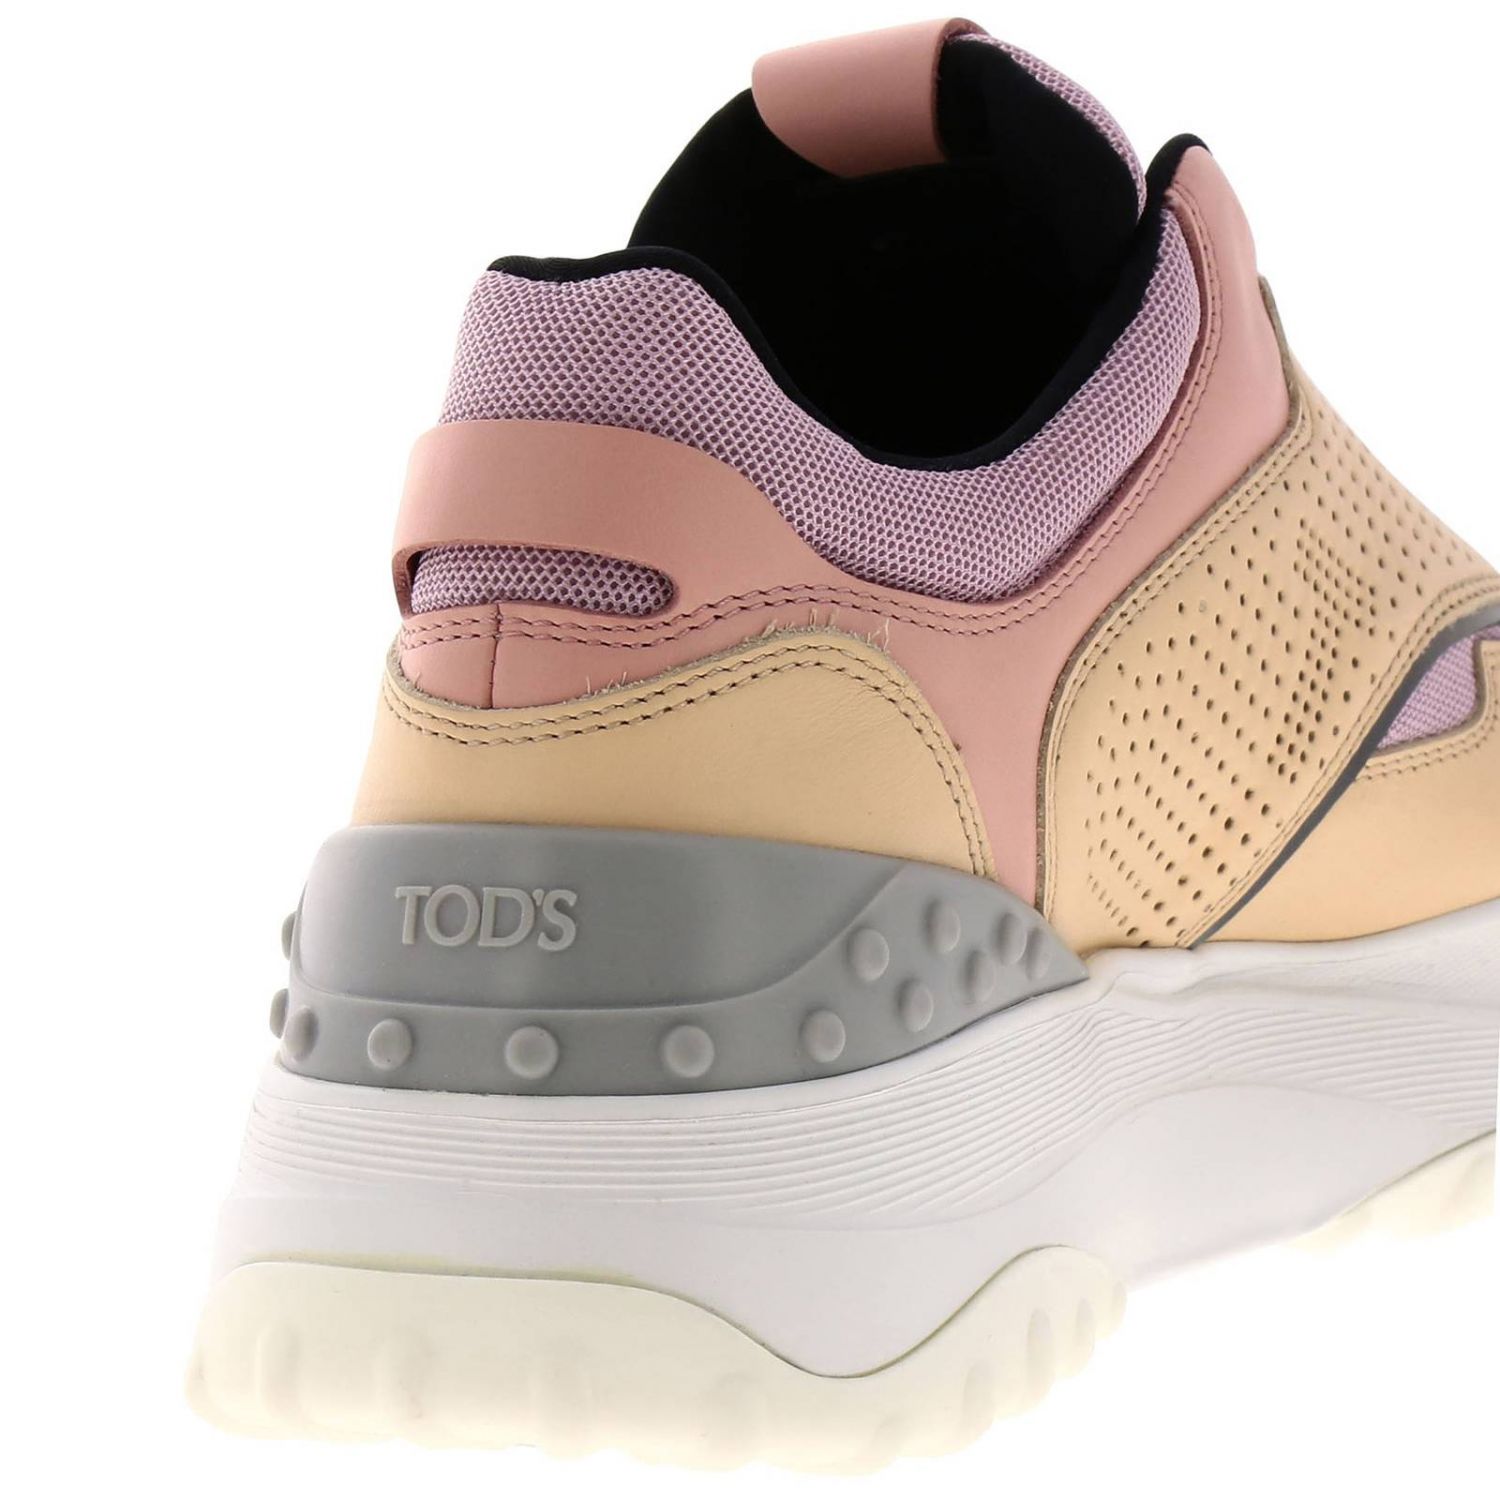 Tods Outlet: Sneakers women Tod's | Sneakers Tods Women Pink | Sneakers Tods  XXW45B0BB40 KZL GIGLIO.COM